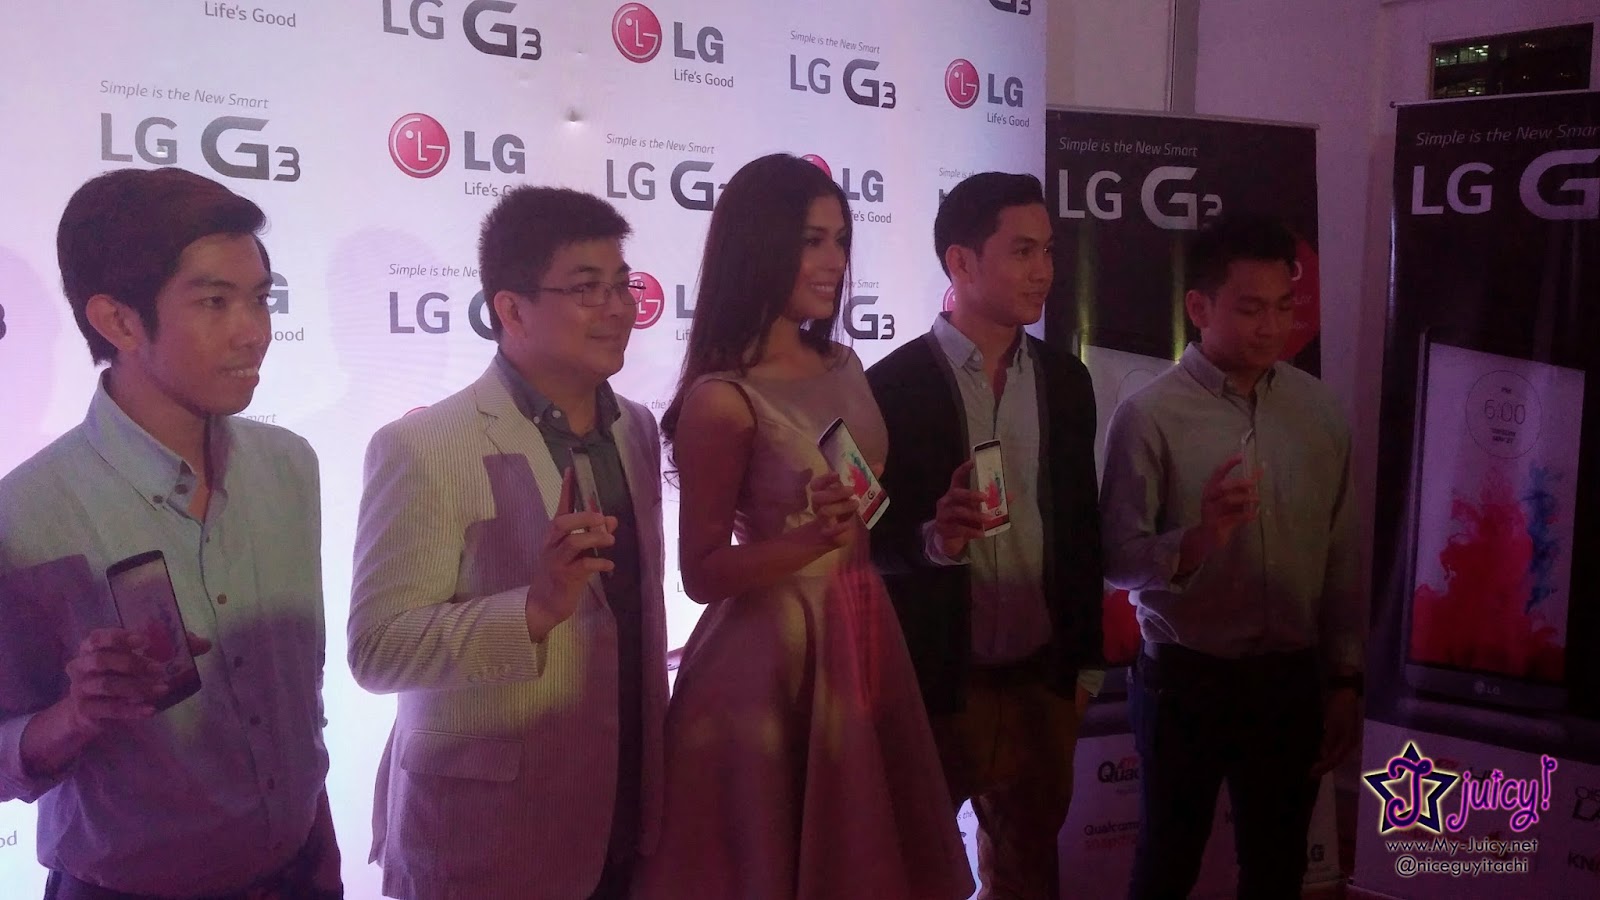 LG G3 comes in PH - "Simple is the new smart"